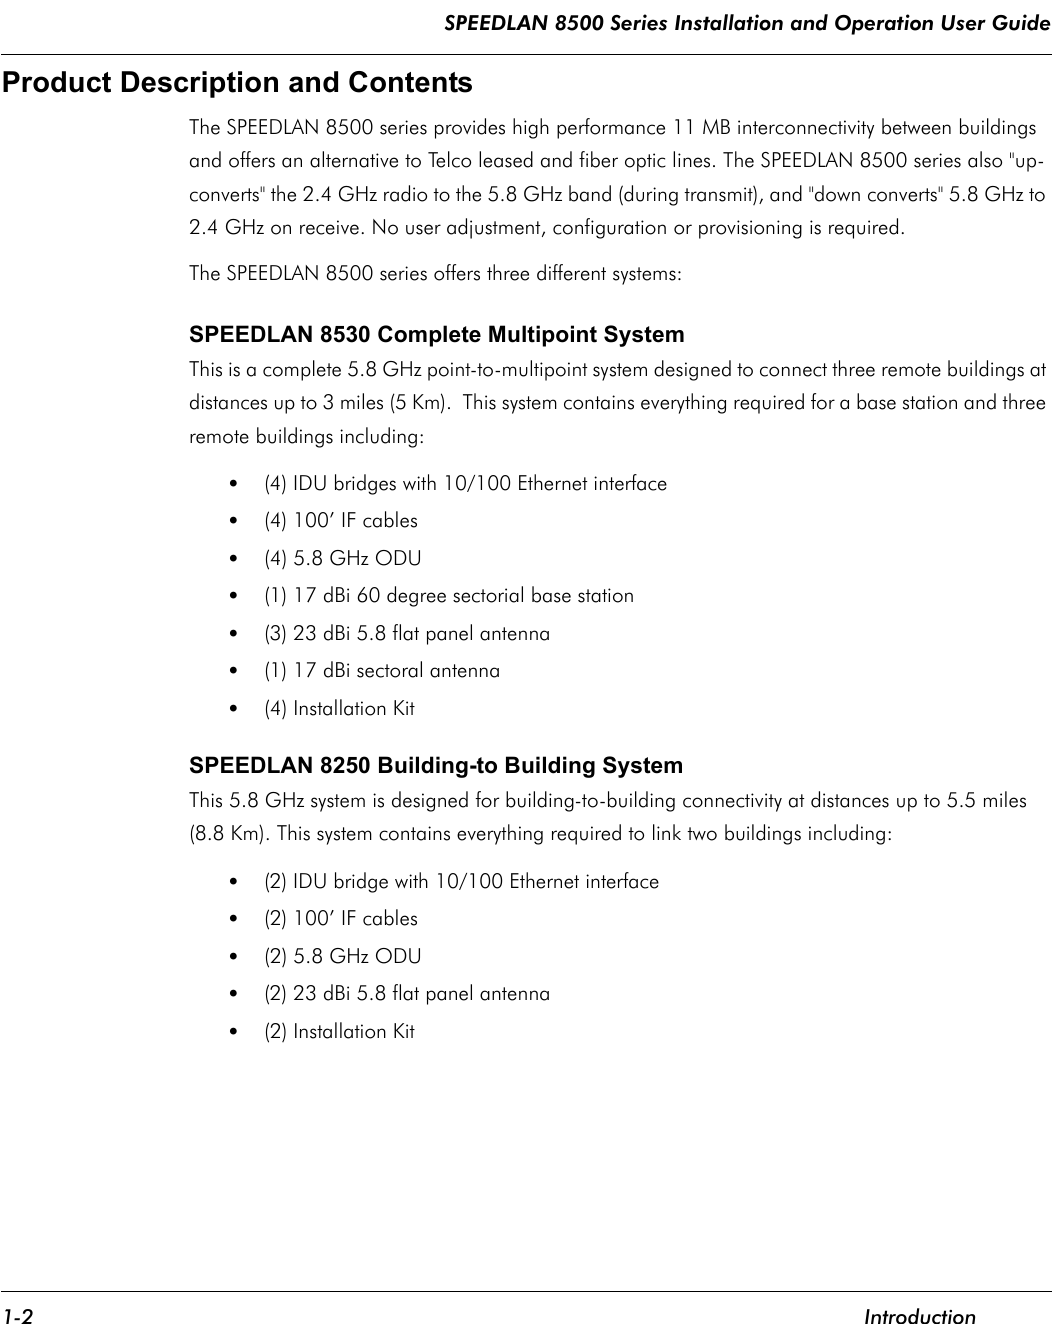 SPEEDLAN 8500 Series Installation and Operation User Guide 1-2 IntroductionProduct Description and Contents The SPEEDLAN 8500 series provides high performance 11 MB interconnectivity between buildings and offers an alternative to Telco leased and fiber optic lines. The SPEEDLAN 8500 series also &quot;up-converts&quot; the 2.4 GHz radio to the 5.8 GHz band (during transmit), and &quot;down converts&quot; 5.8 GHz to 2.4 GHz on receive. No user adjustment, configuration or provisioning is required.The SPEEDLAN 8500 series offers three different systems:SPEEDLAN 8530 Complete Multipoint SystemThis is a complete 5.8 GHz point-to-multipoint system designed to connect three remote buildings at distances up to 3 miles (5 Km).  This system contains everything required for a base station and three remote buildings including:•(4) IDU bridges with 10/100 Ethernet interface •(4) 100’ IF cables •(4) 5.8 GHz ODU •(1) 17 dBi 60 degree sectorial base station •(3) 23 dBi 5.8 flat panel antenna•(1) 17 dBi sectoral antenna•(4) Installation Kit SPEEDLAN 8250 Building-to Building SystemThis 5.8 GHz system is designed for building-to-building connectivity at distances up to 5.5 miles (8.8 Km). This system contains everything required to link two buildings including:•(2) IDU bridge with 10/100 Ethernet interface •(2) 100’ IF cables •(2) 5.8 GHz ODU •(2) 23 dBi 5.8 flat panel antenna•(2) Installation Kit              